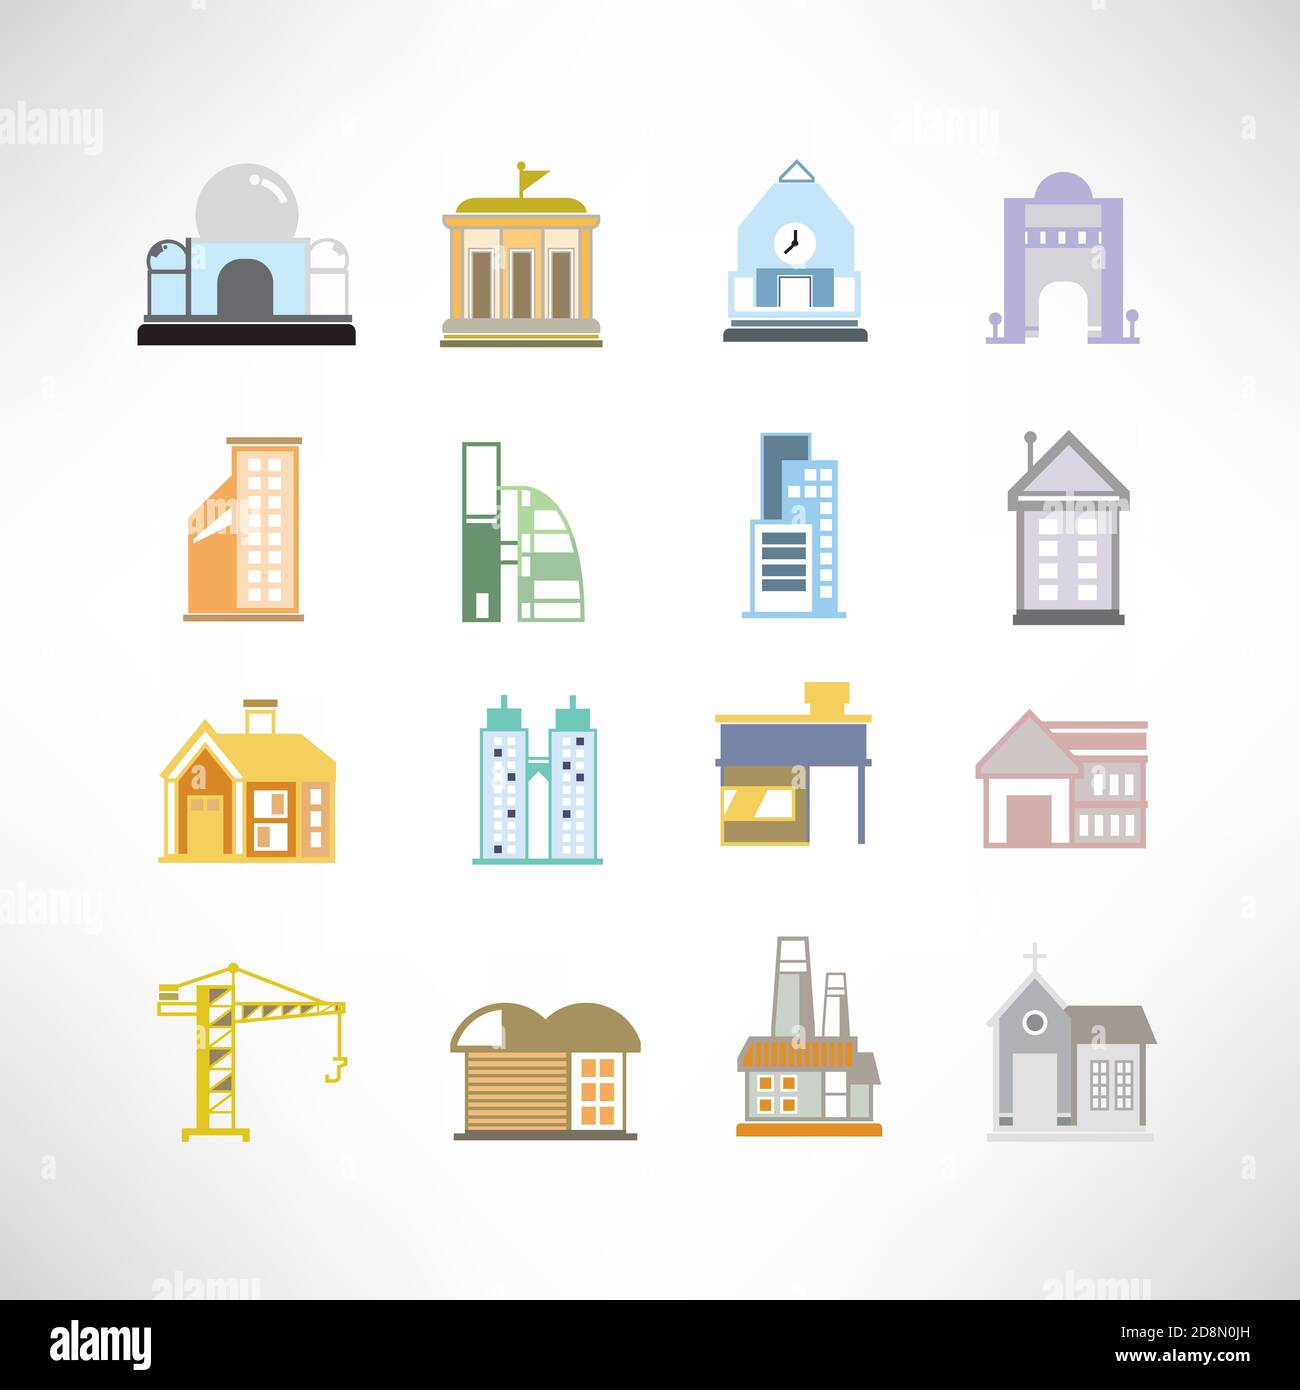 building icons set Stock Vector